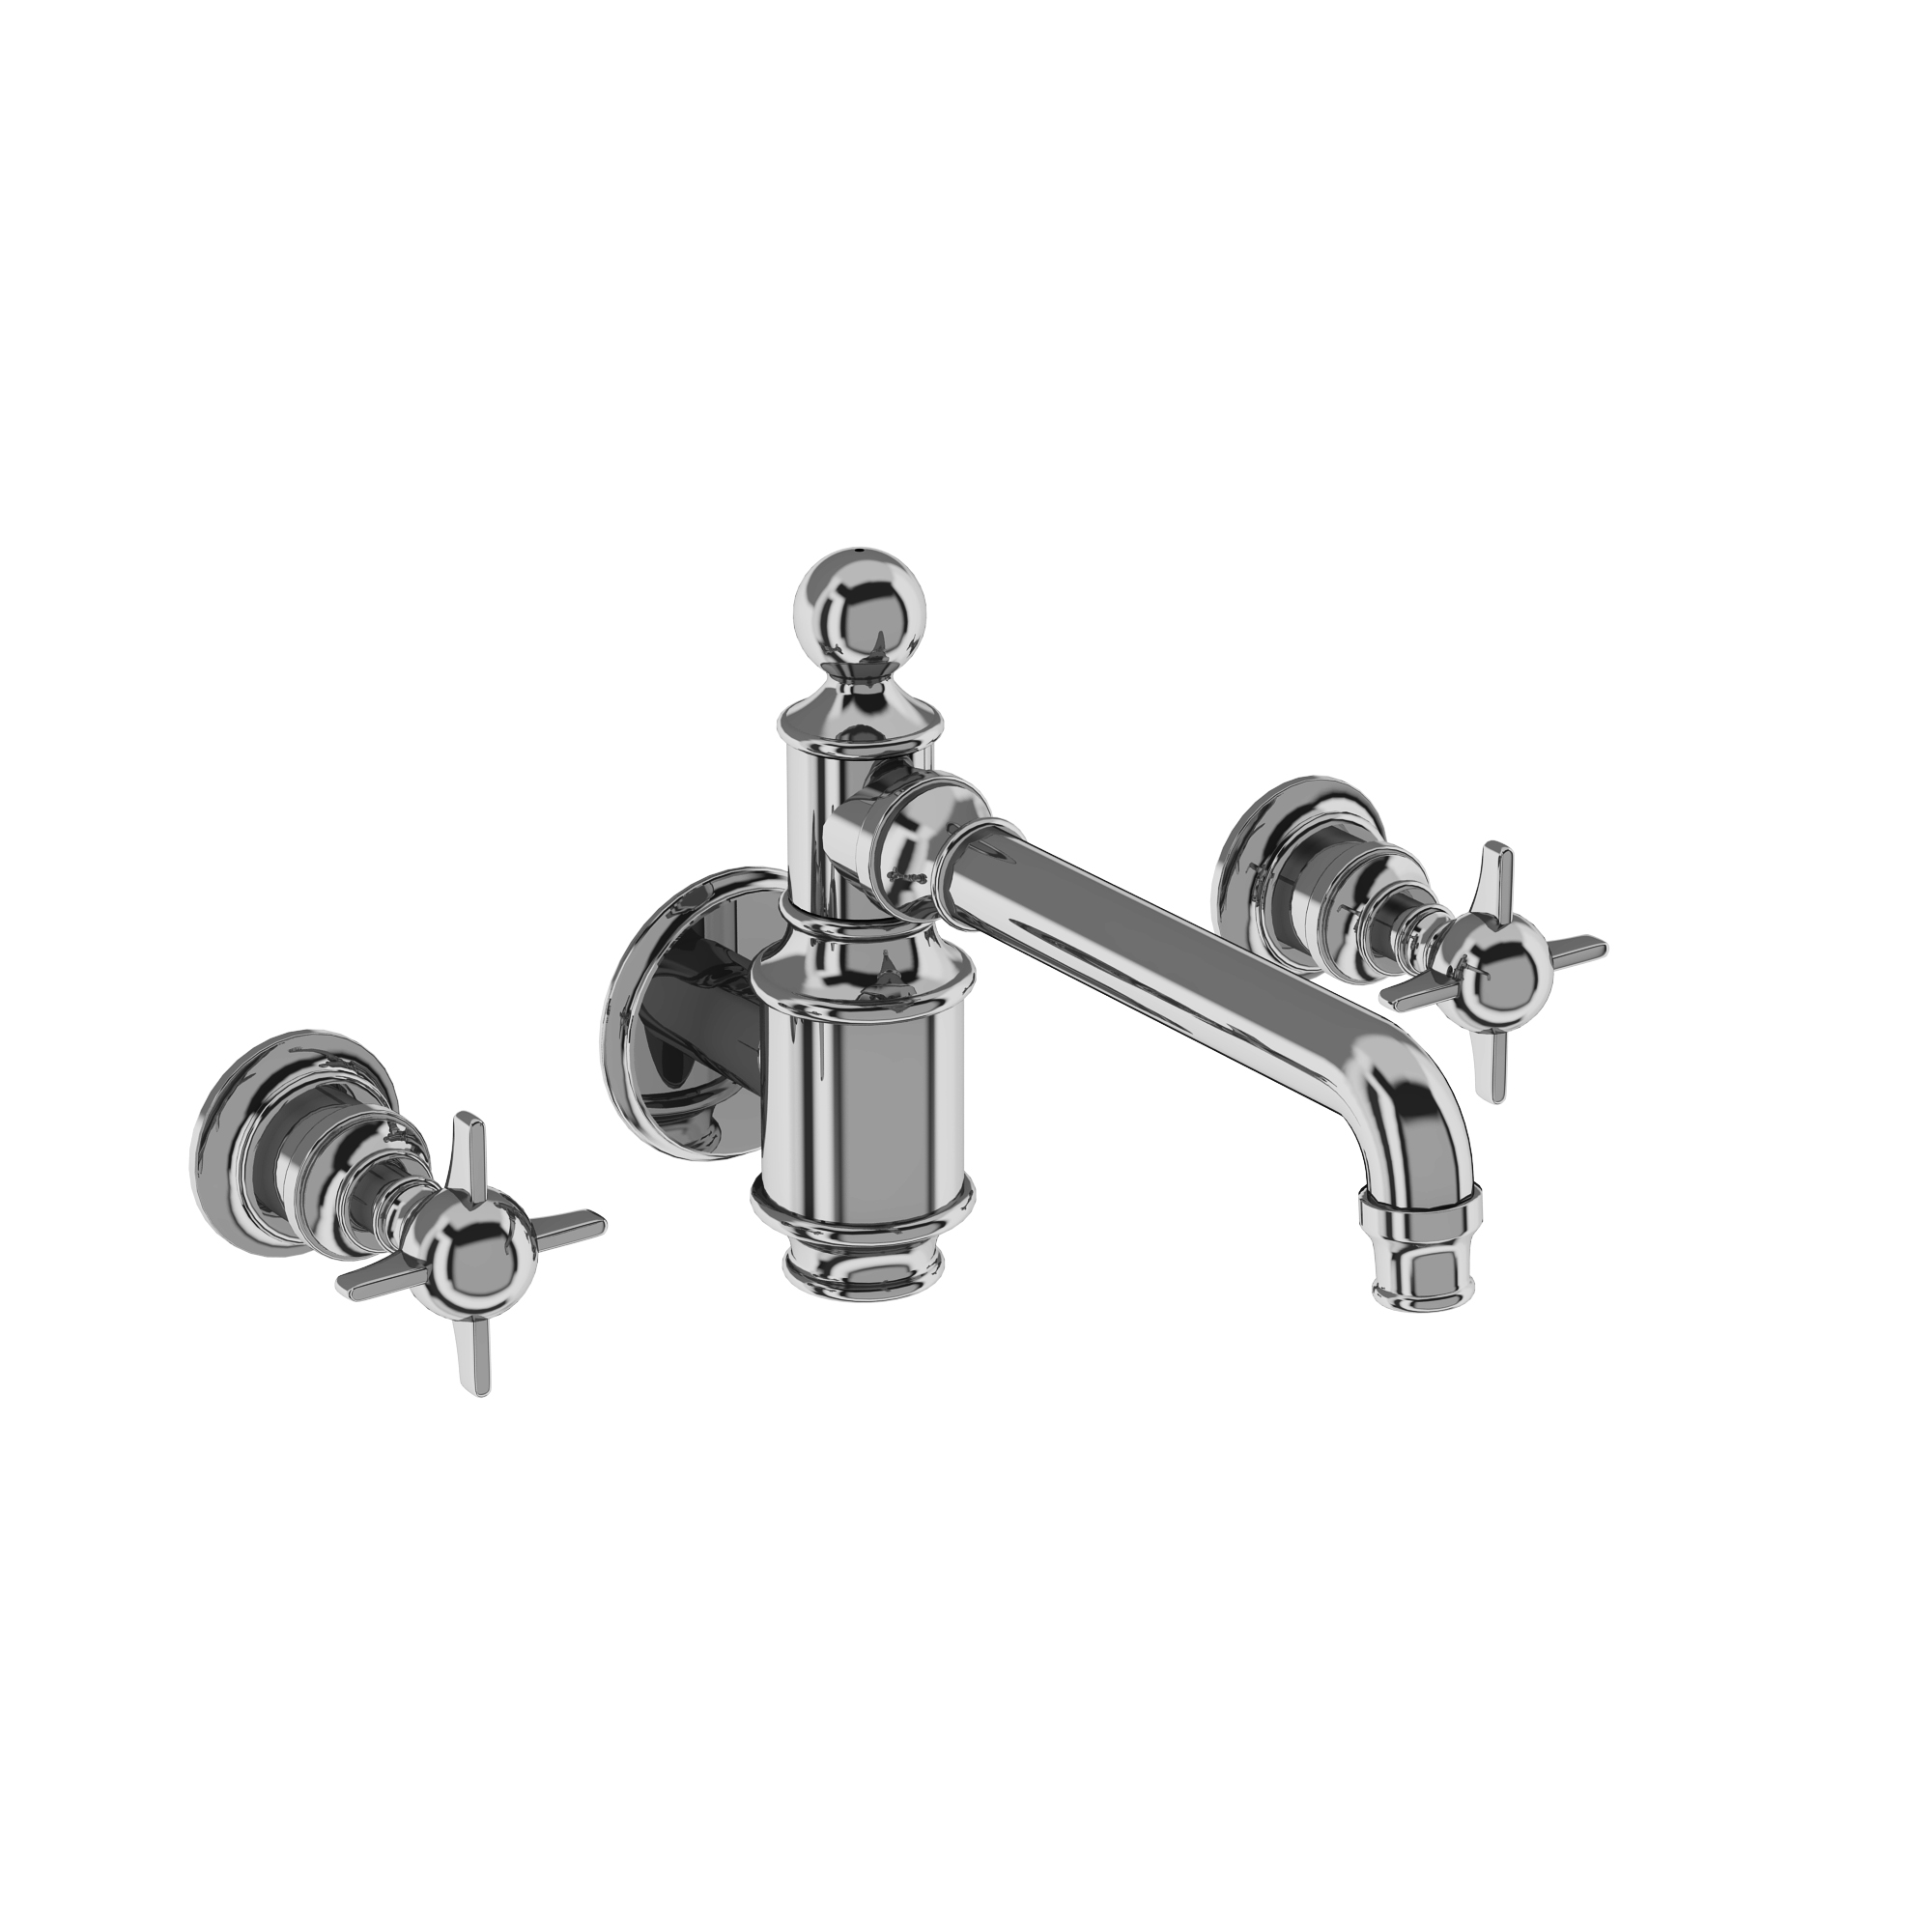 Arcade Three hole basin mixer wall-mounted without pop up waste - chrome - with tap handle